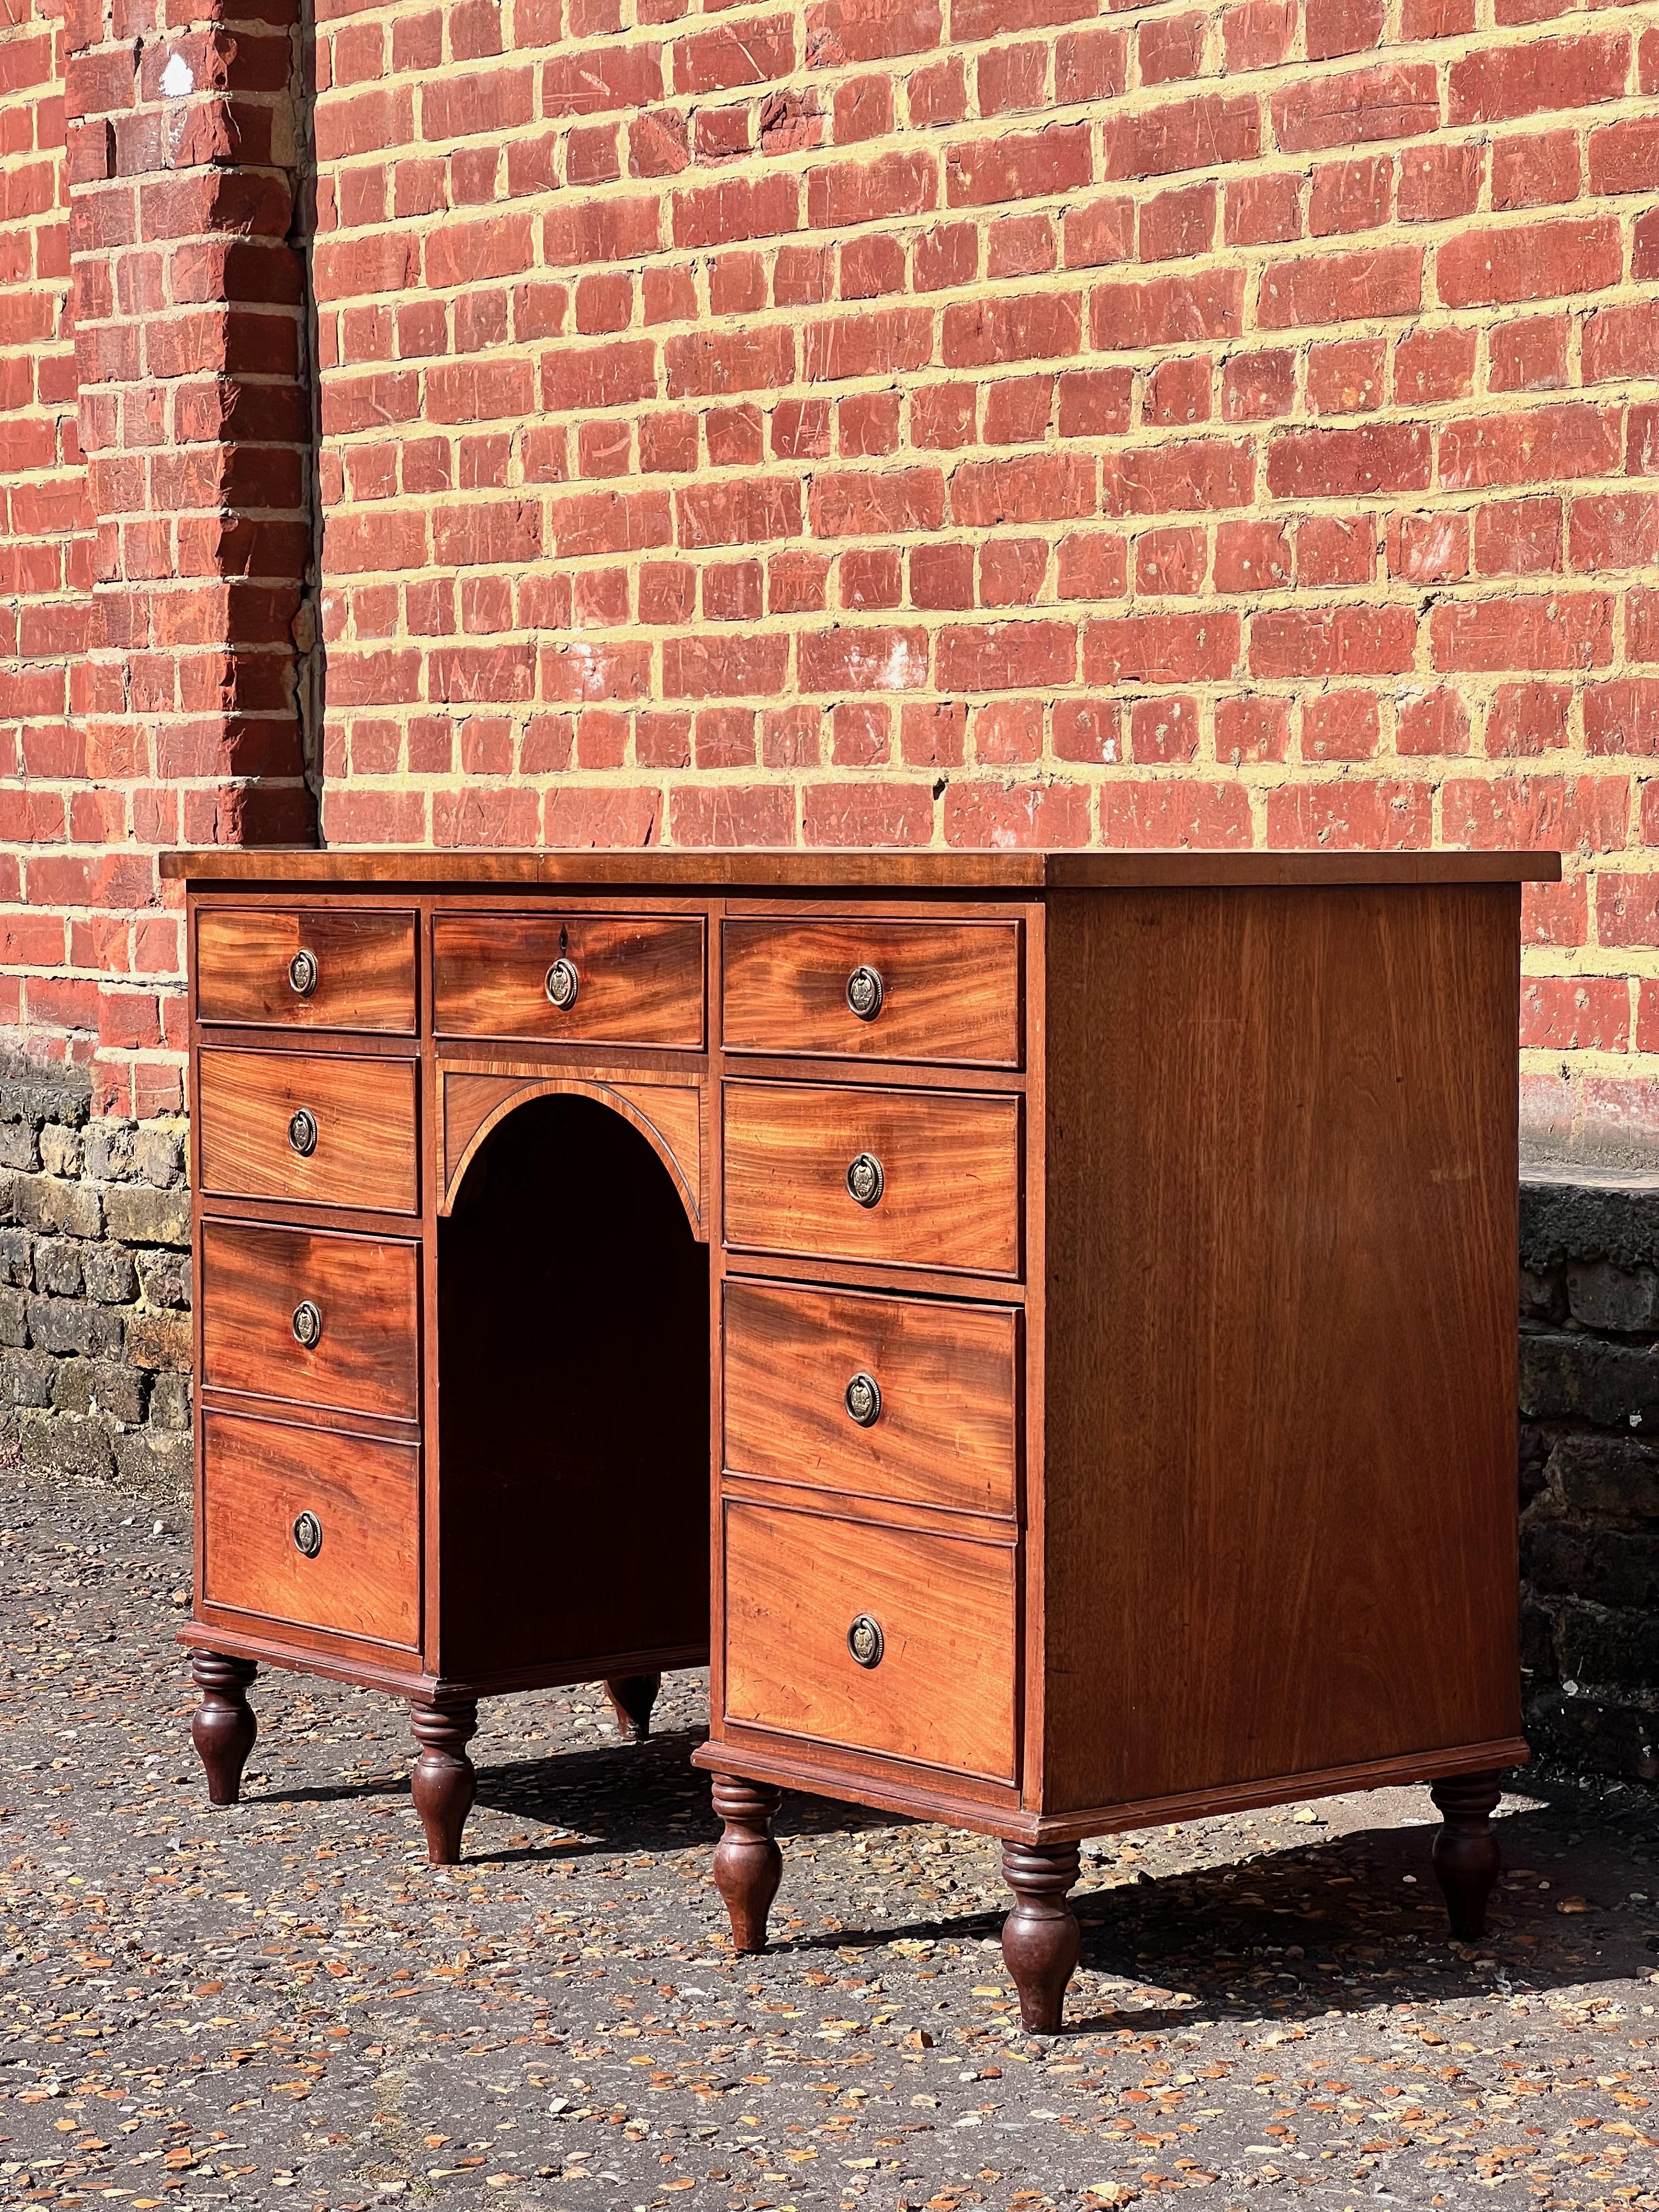 A superb quality Regency side table or in the manner of Gillows.
England, circa 1820.

Why we like it

With its superb quality of construction, premium veneers of the best Santo Domingo mahogany, splendid colour and patination, this table is